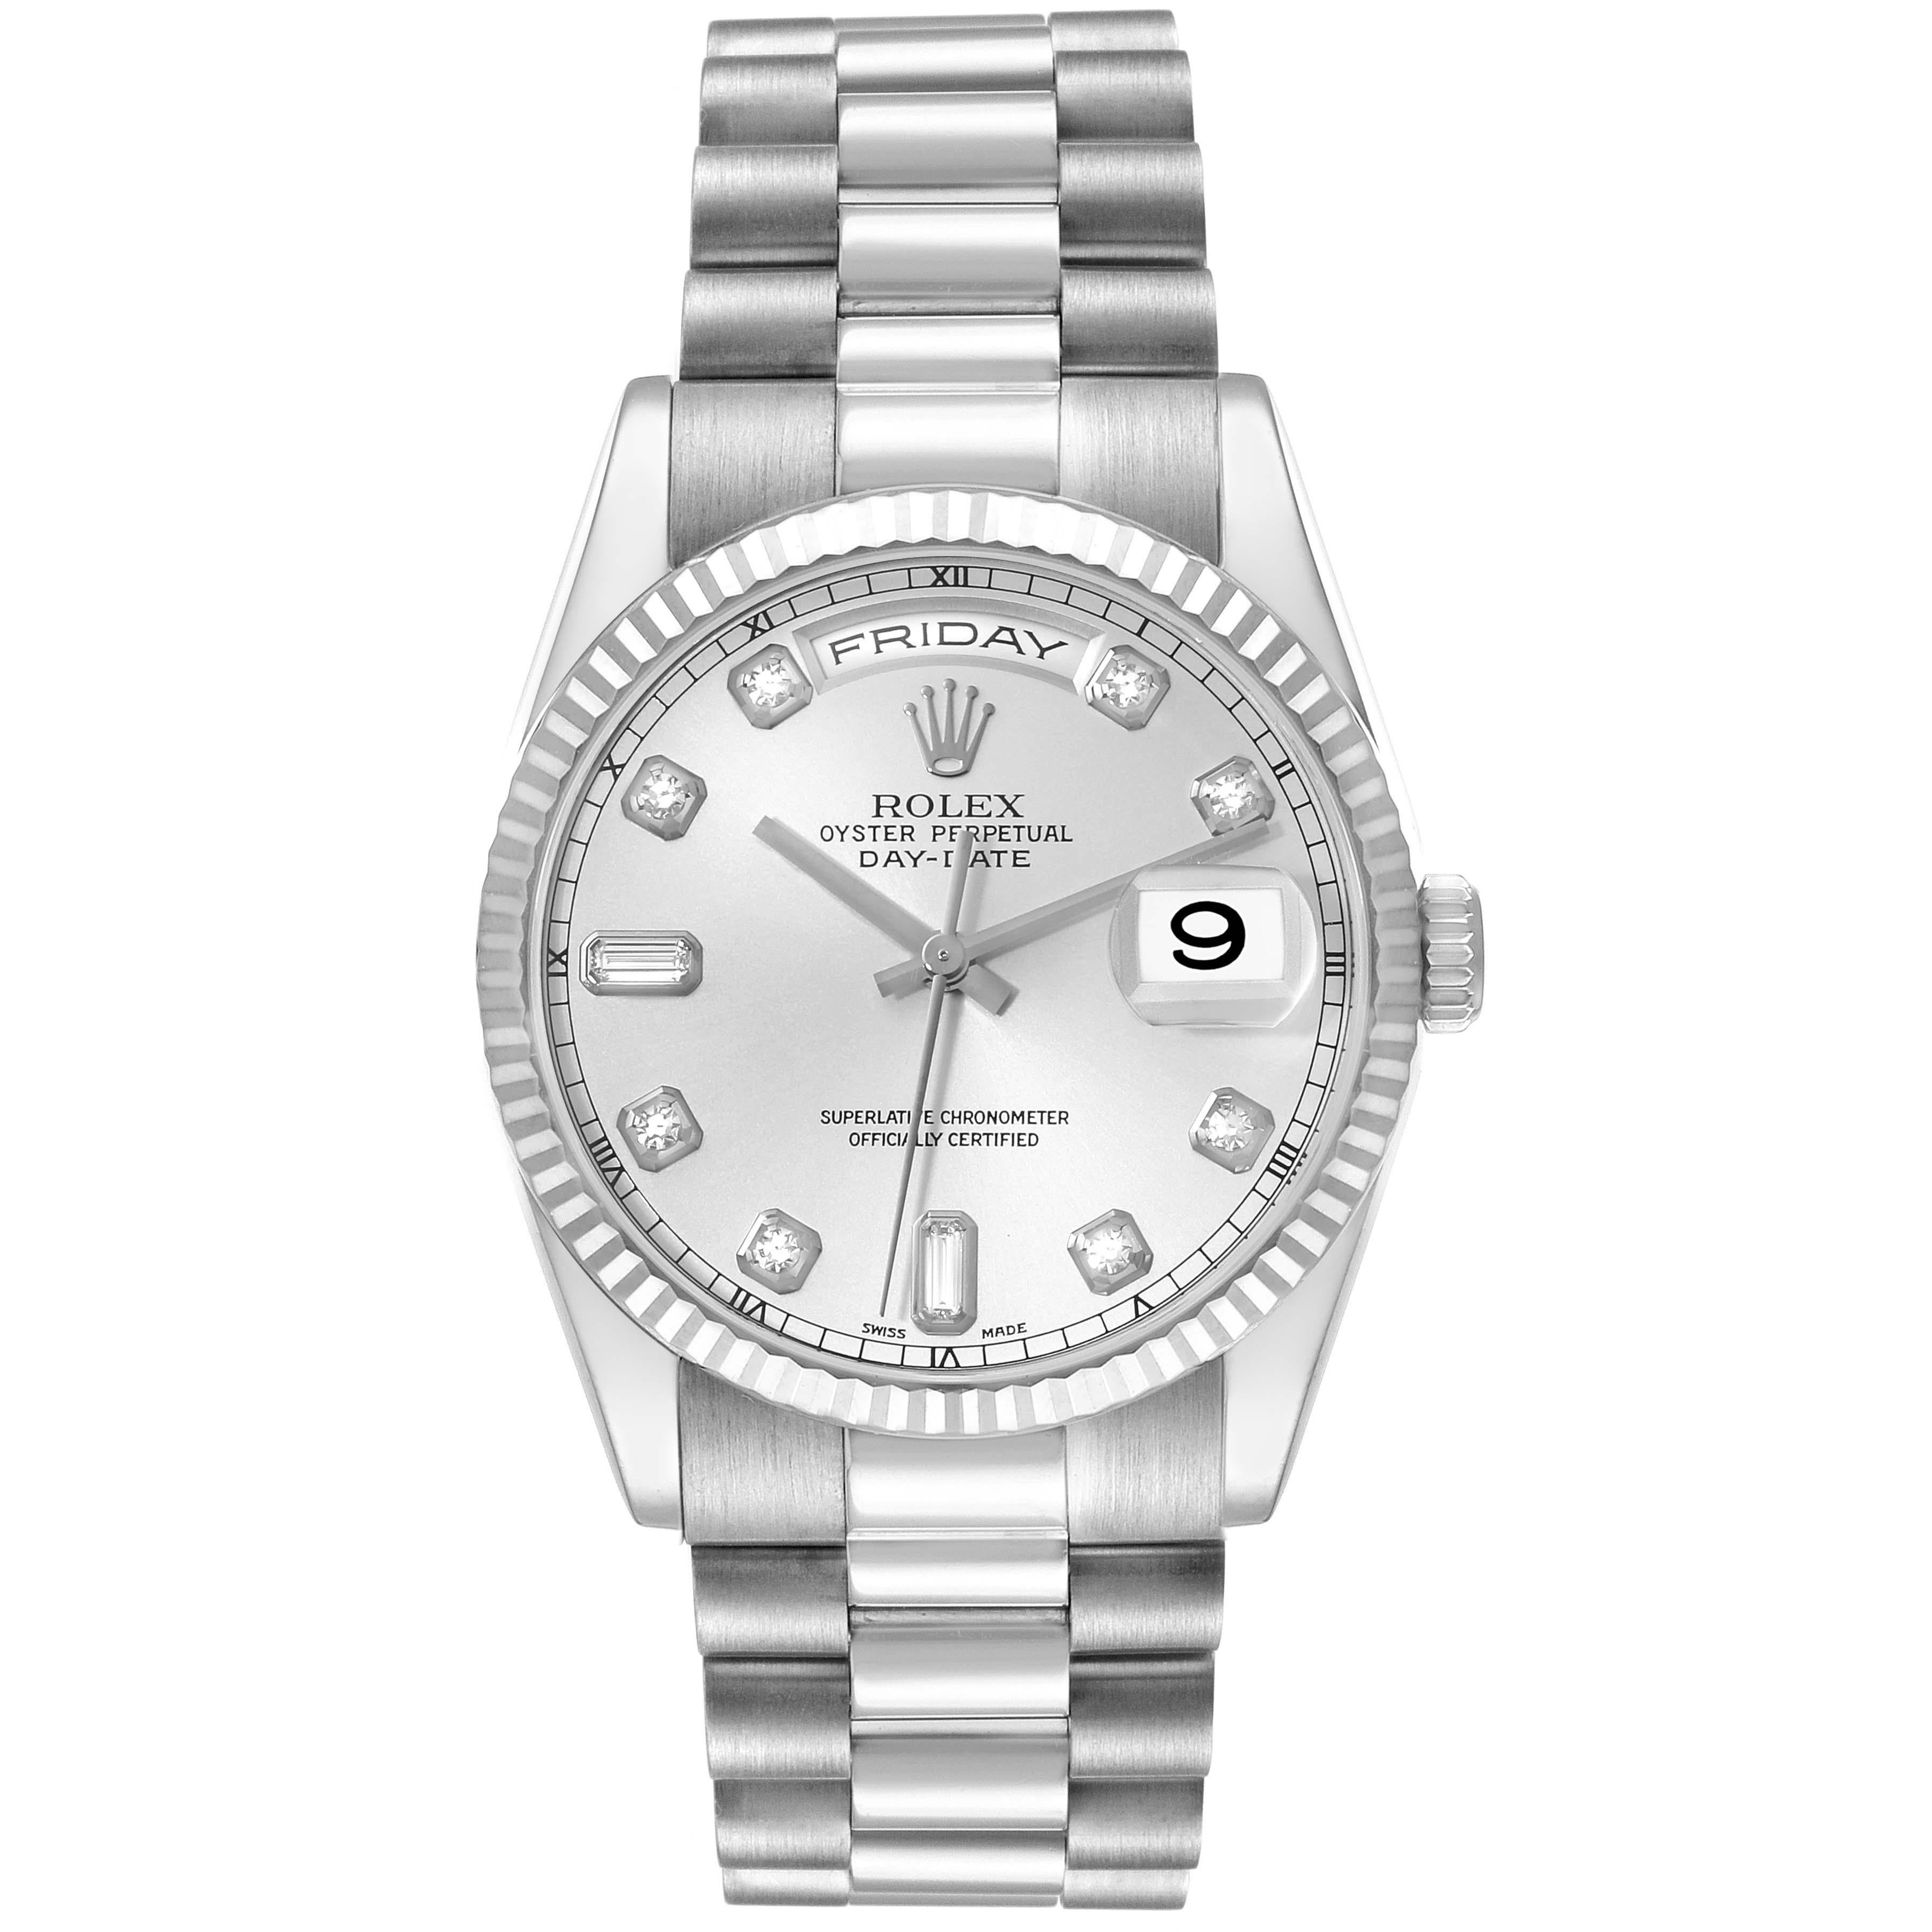 Rolex President Day-Date White Gold Diamond Dial Mens Watch 118239. Officially certified chronometer automatic self-winding movement. 18k white gold oyster case 36.0 mm in diameter. Rolex logo on a crown. 18k white gold fluted bezel. Scratch